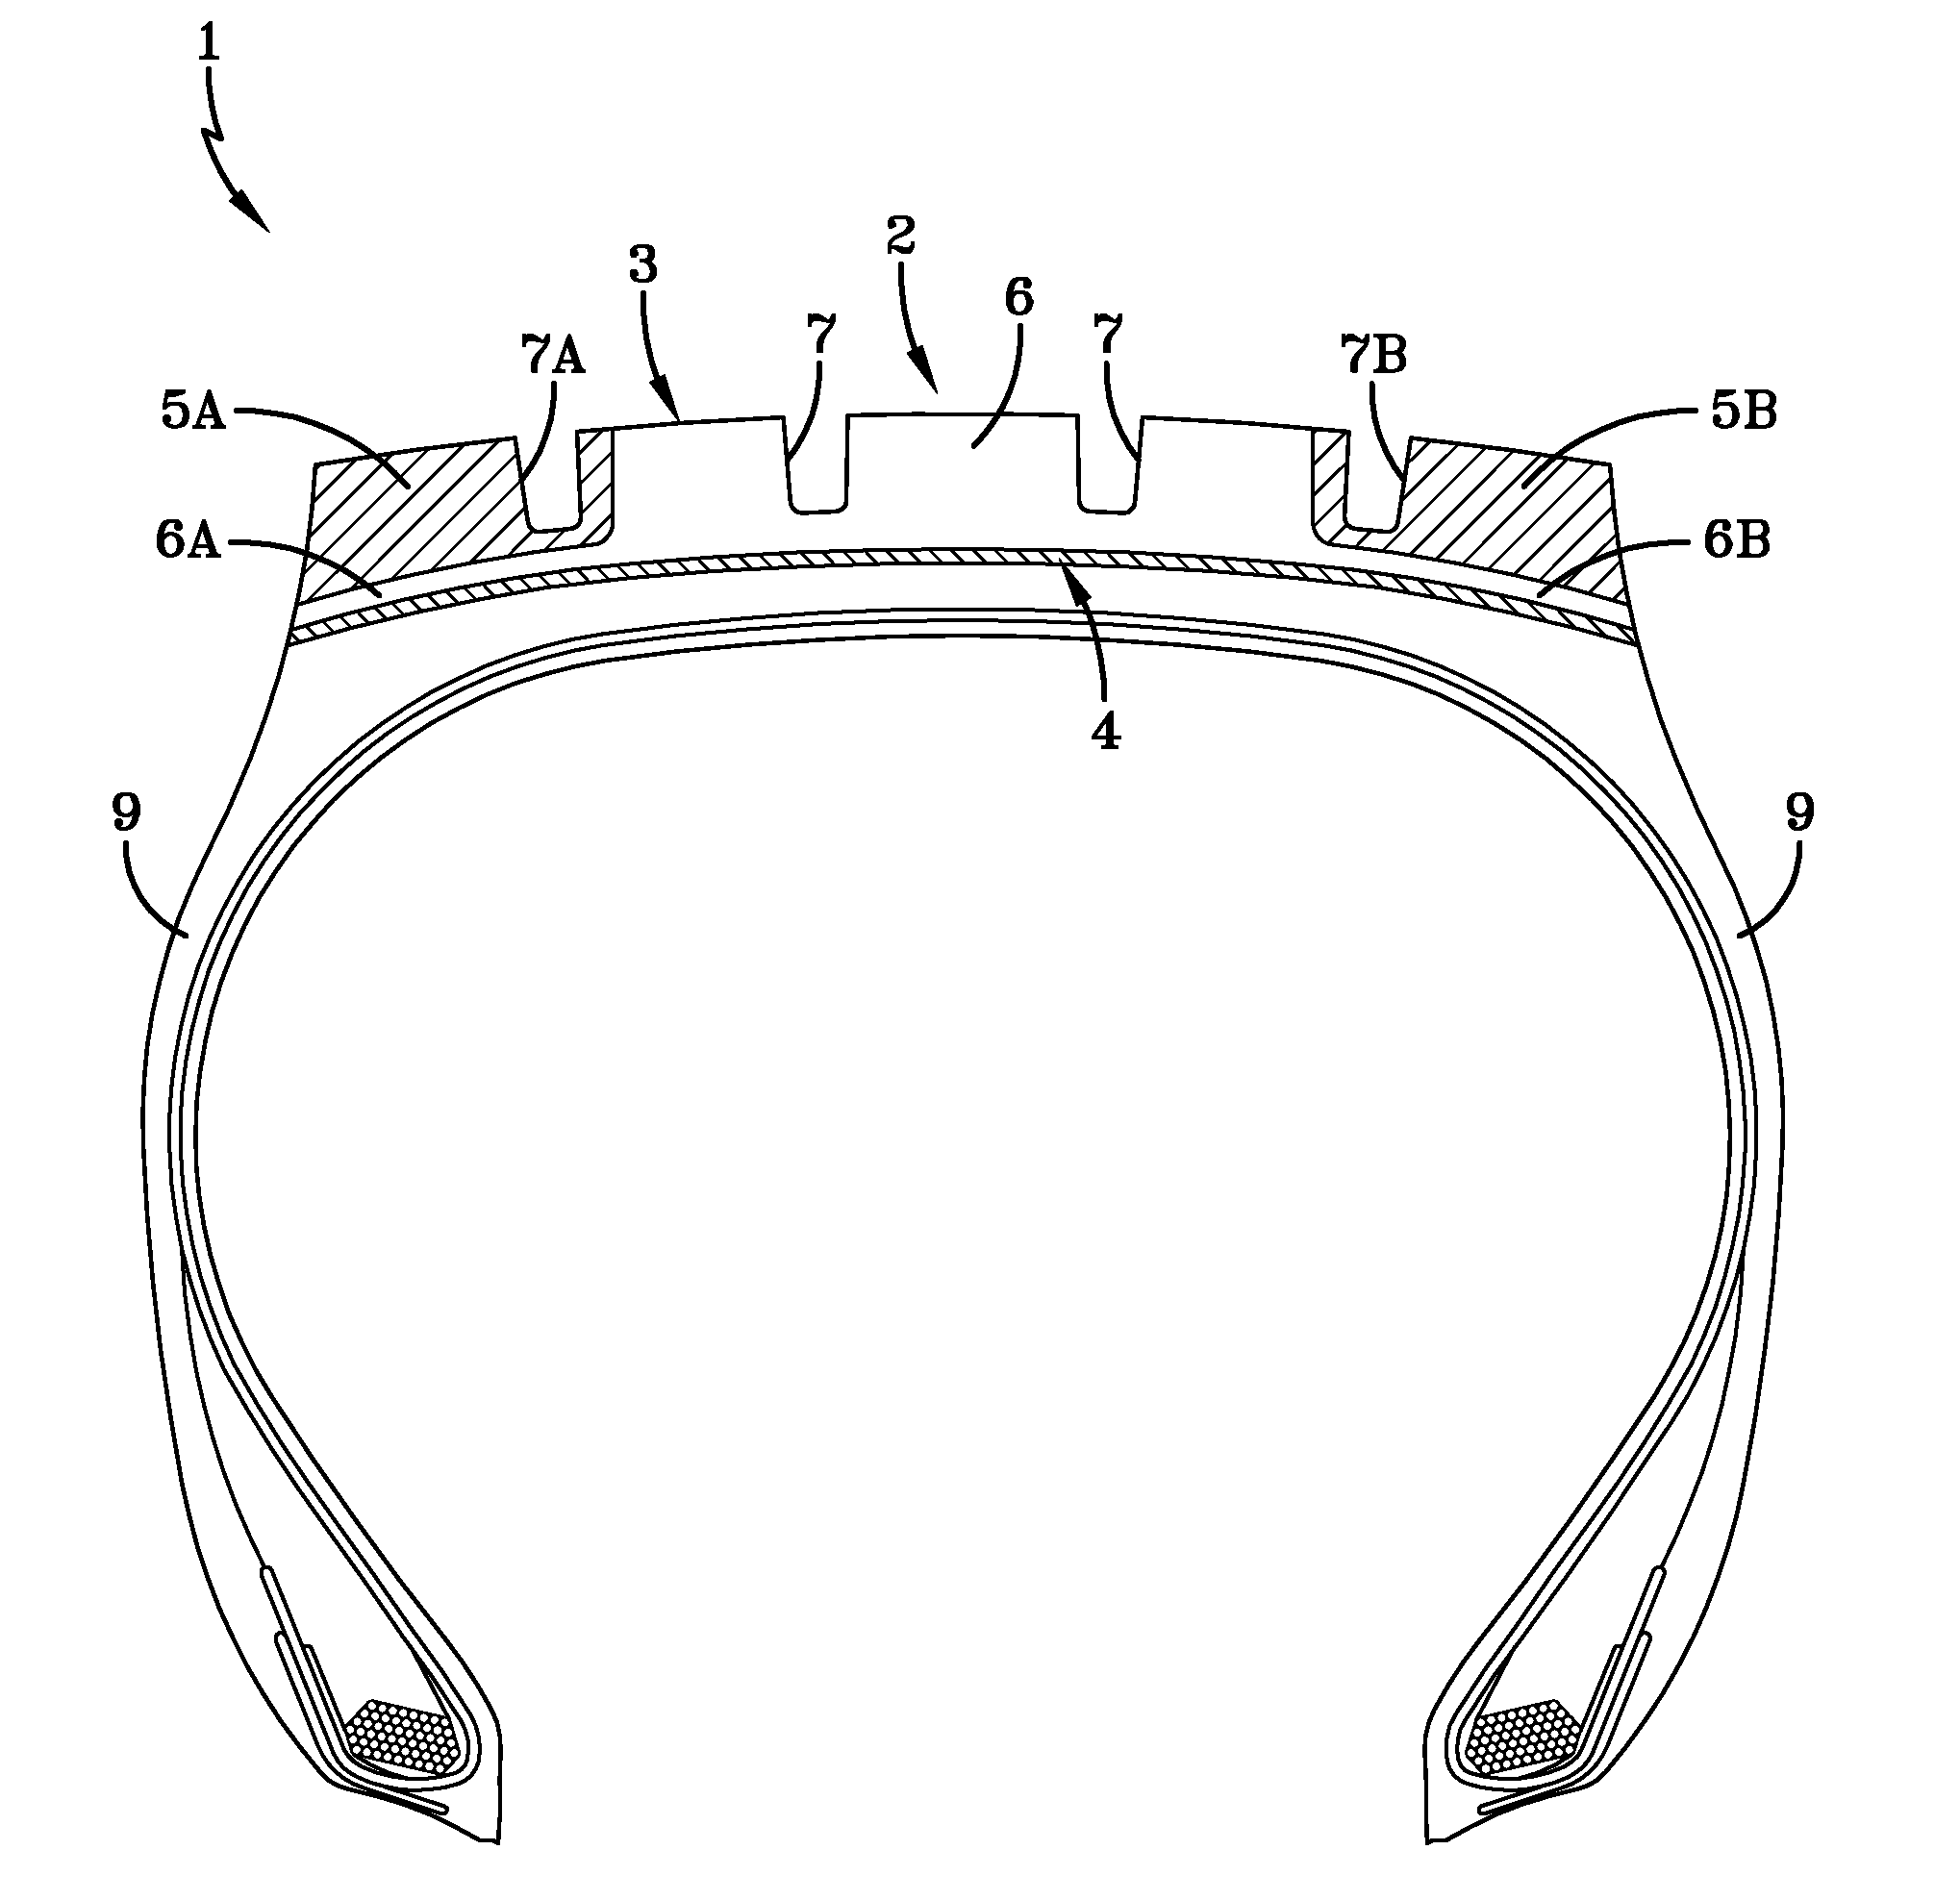 Tire with rubber tread of intermedial and lateral zones with path of least electrical resistance